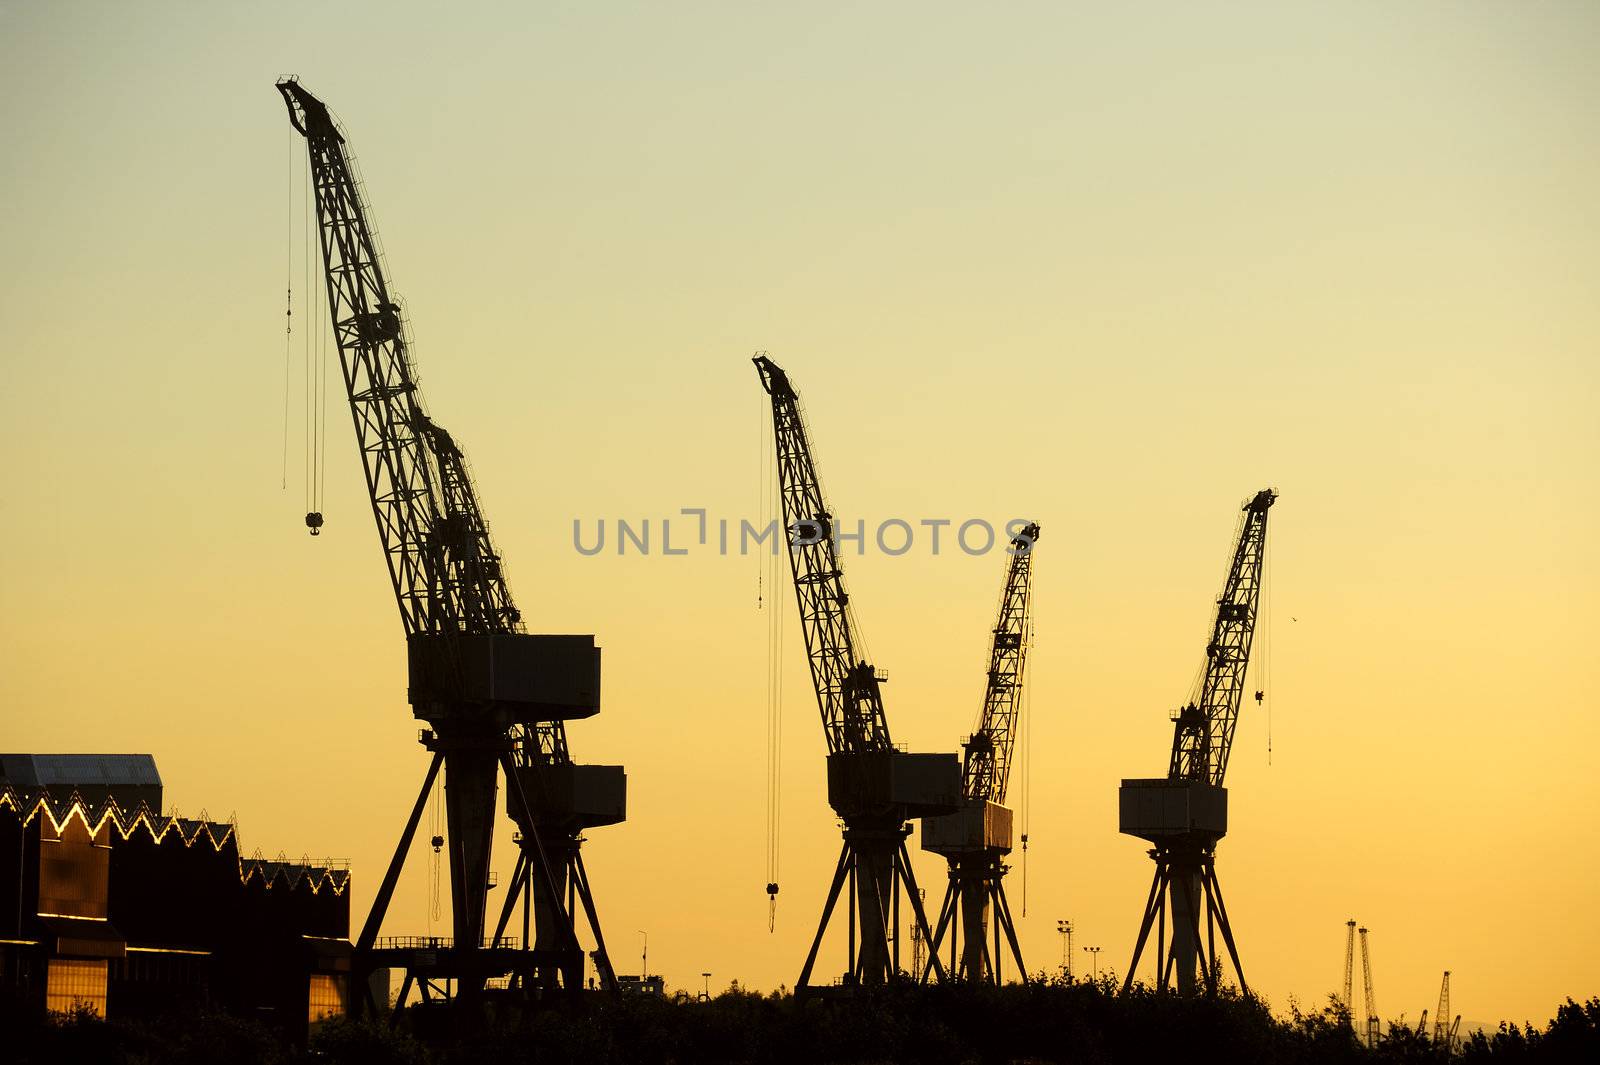 Cranes of a Glasgow shipyard silhouetted against the sky at sunrise/sunset (could be either). Space for text in the sky.